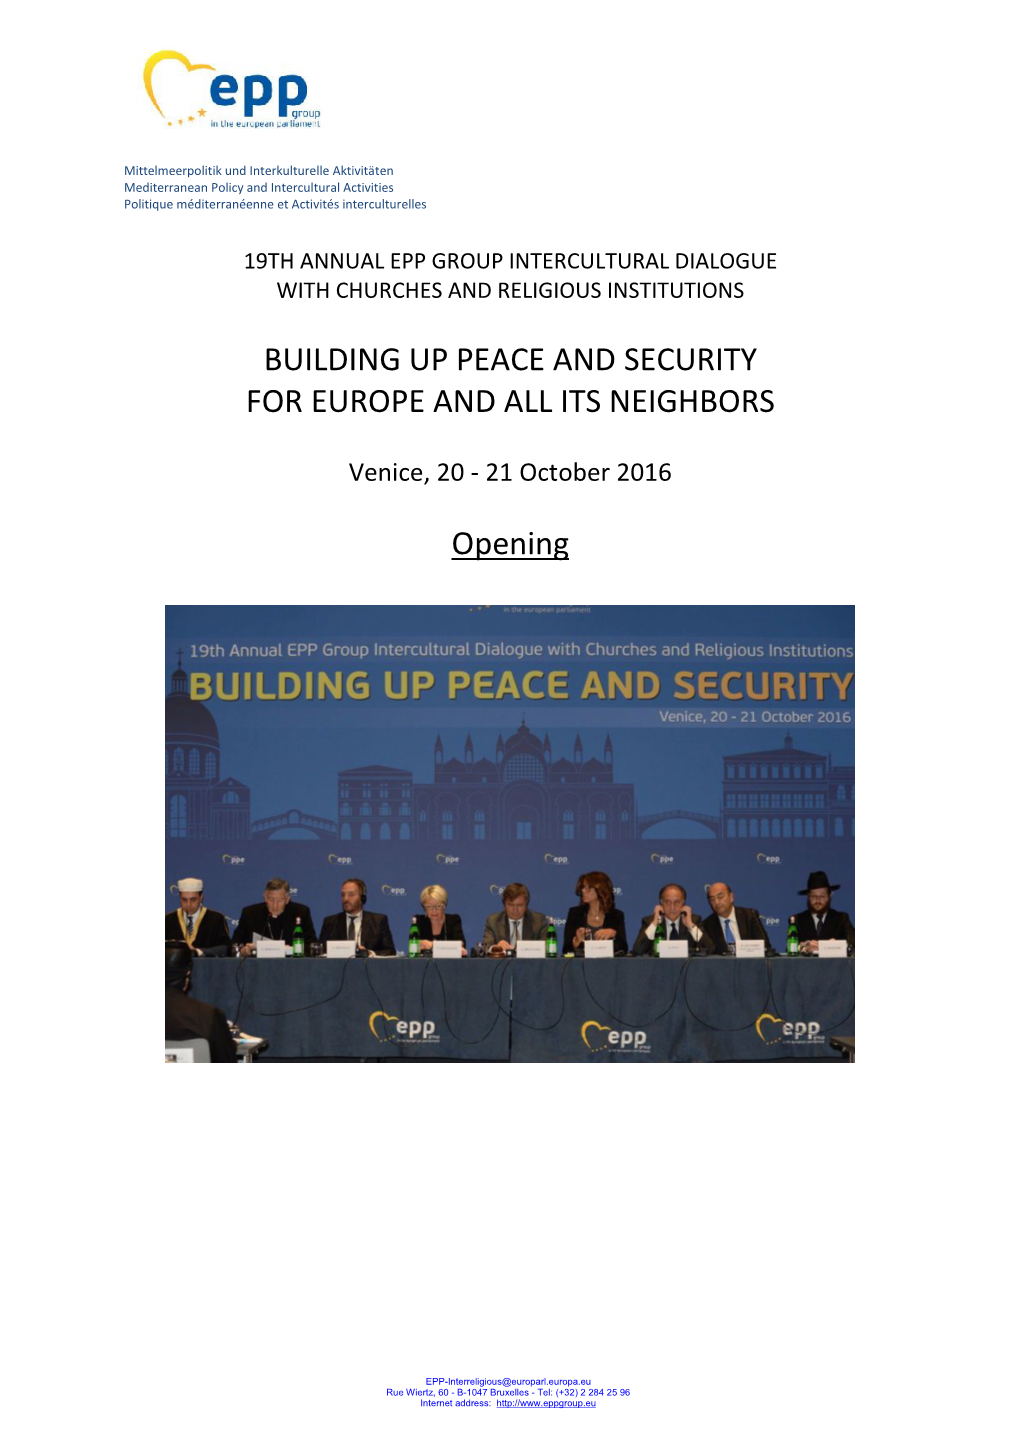 BUILDING up PEACE and SECURITY for EUROPE and ALL ITS NEIGHBORS Opening